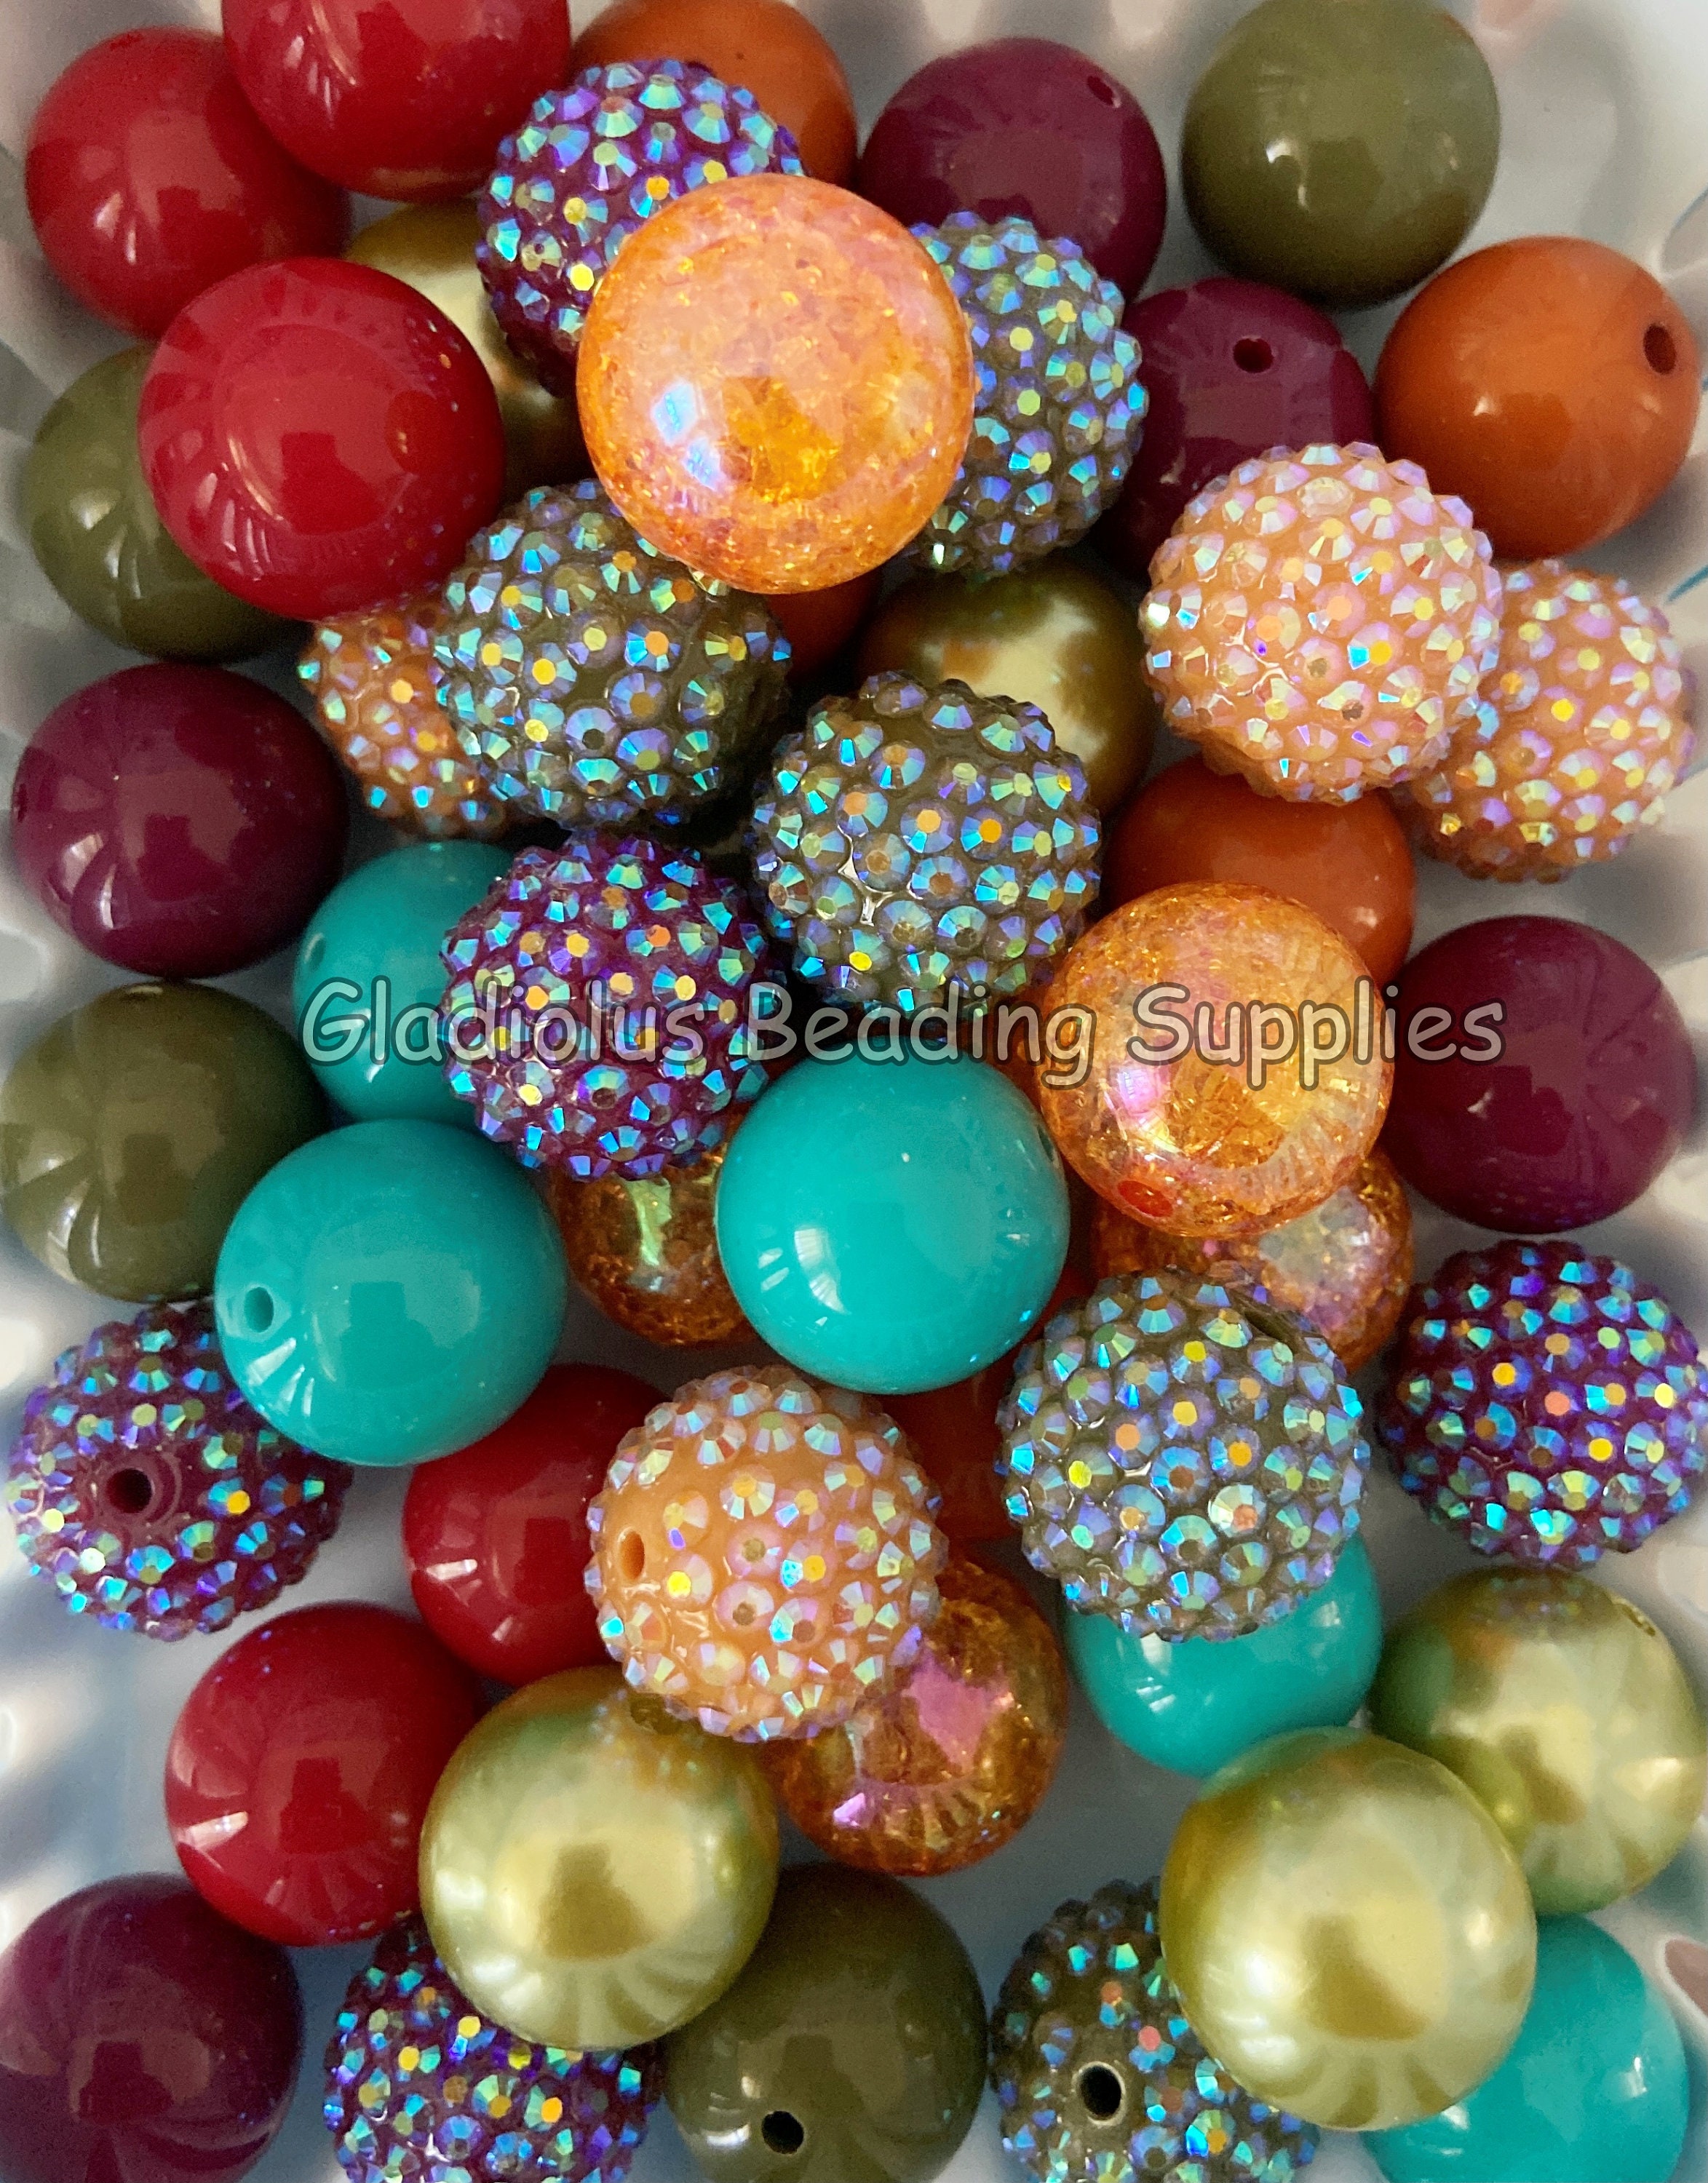  Beads for pens, 20mm Beads for Beadable Pens Mix, Bubblegum  Beads 20mm Bulk, 20 mm Beads for Bead Pens, Large Chunky Beads Bubble Gum  Beads for Pen Making, 50 pcs (Blue/Green/Yellow)